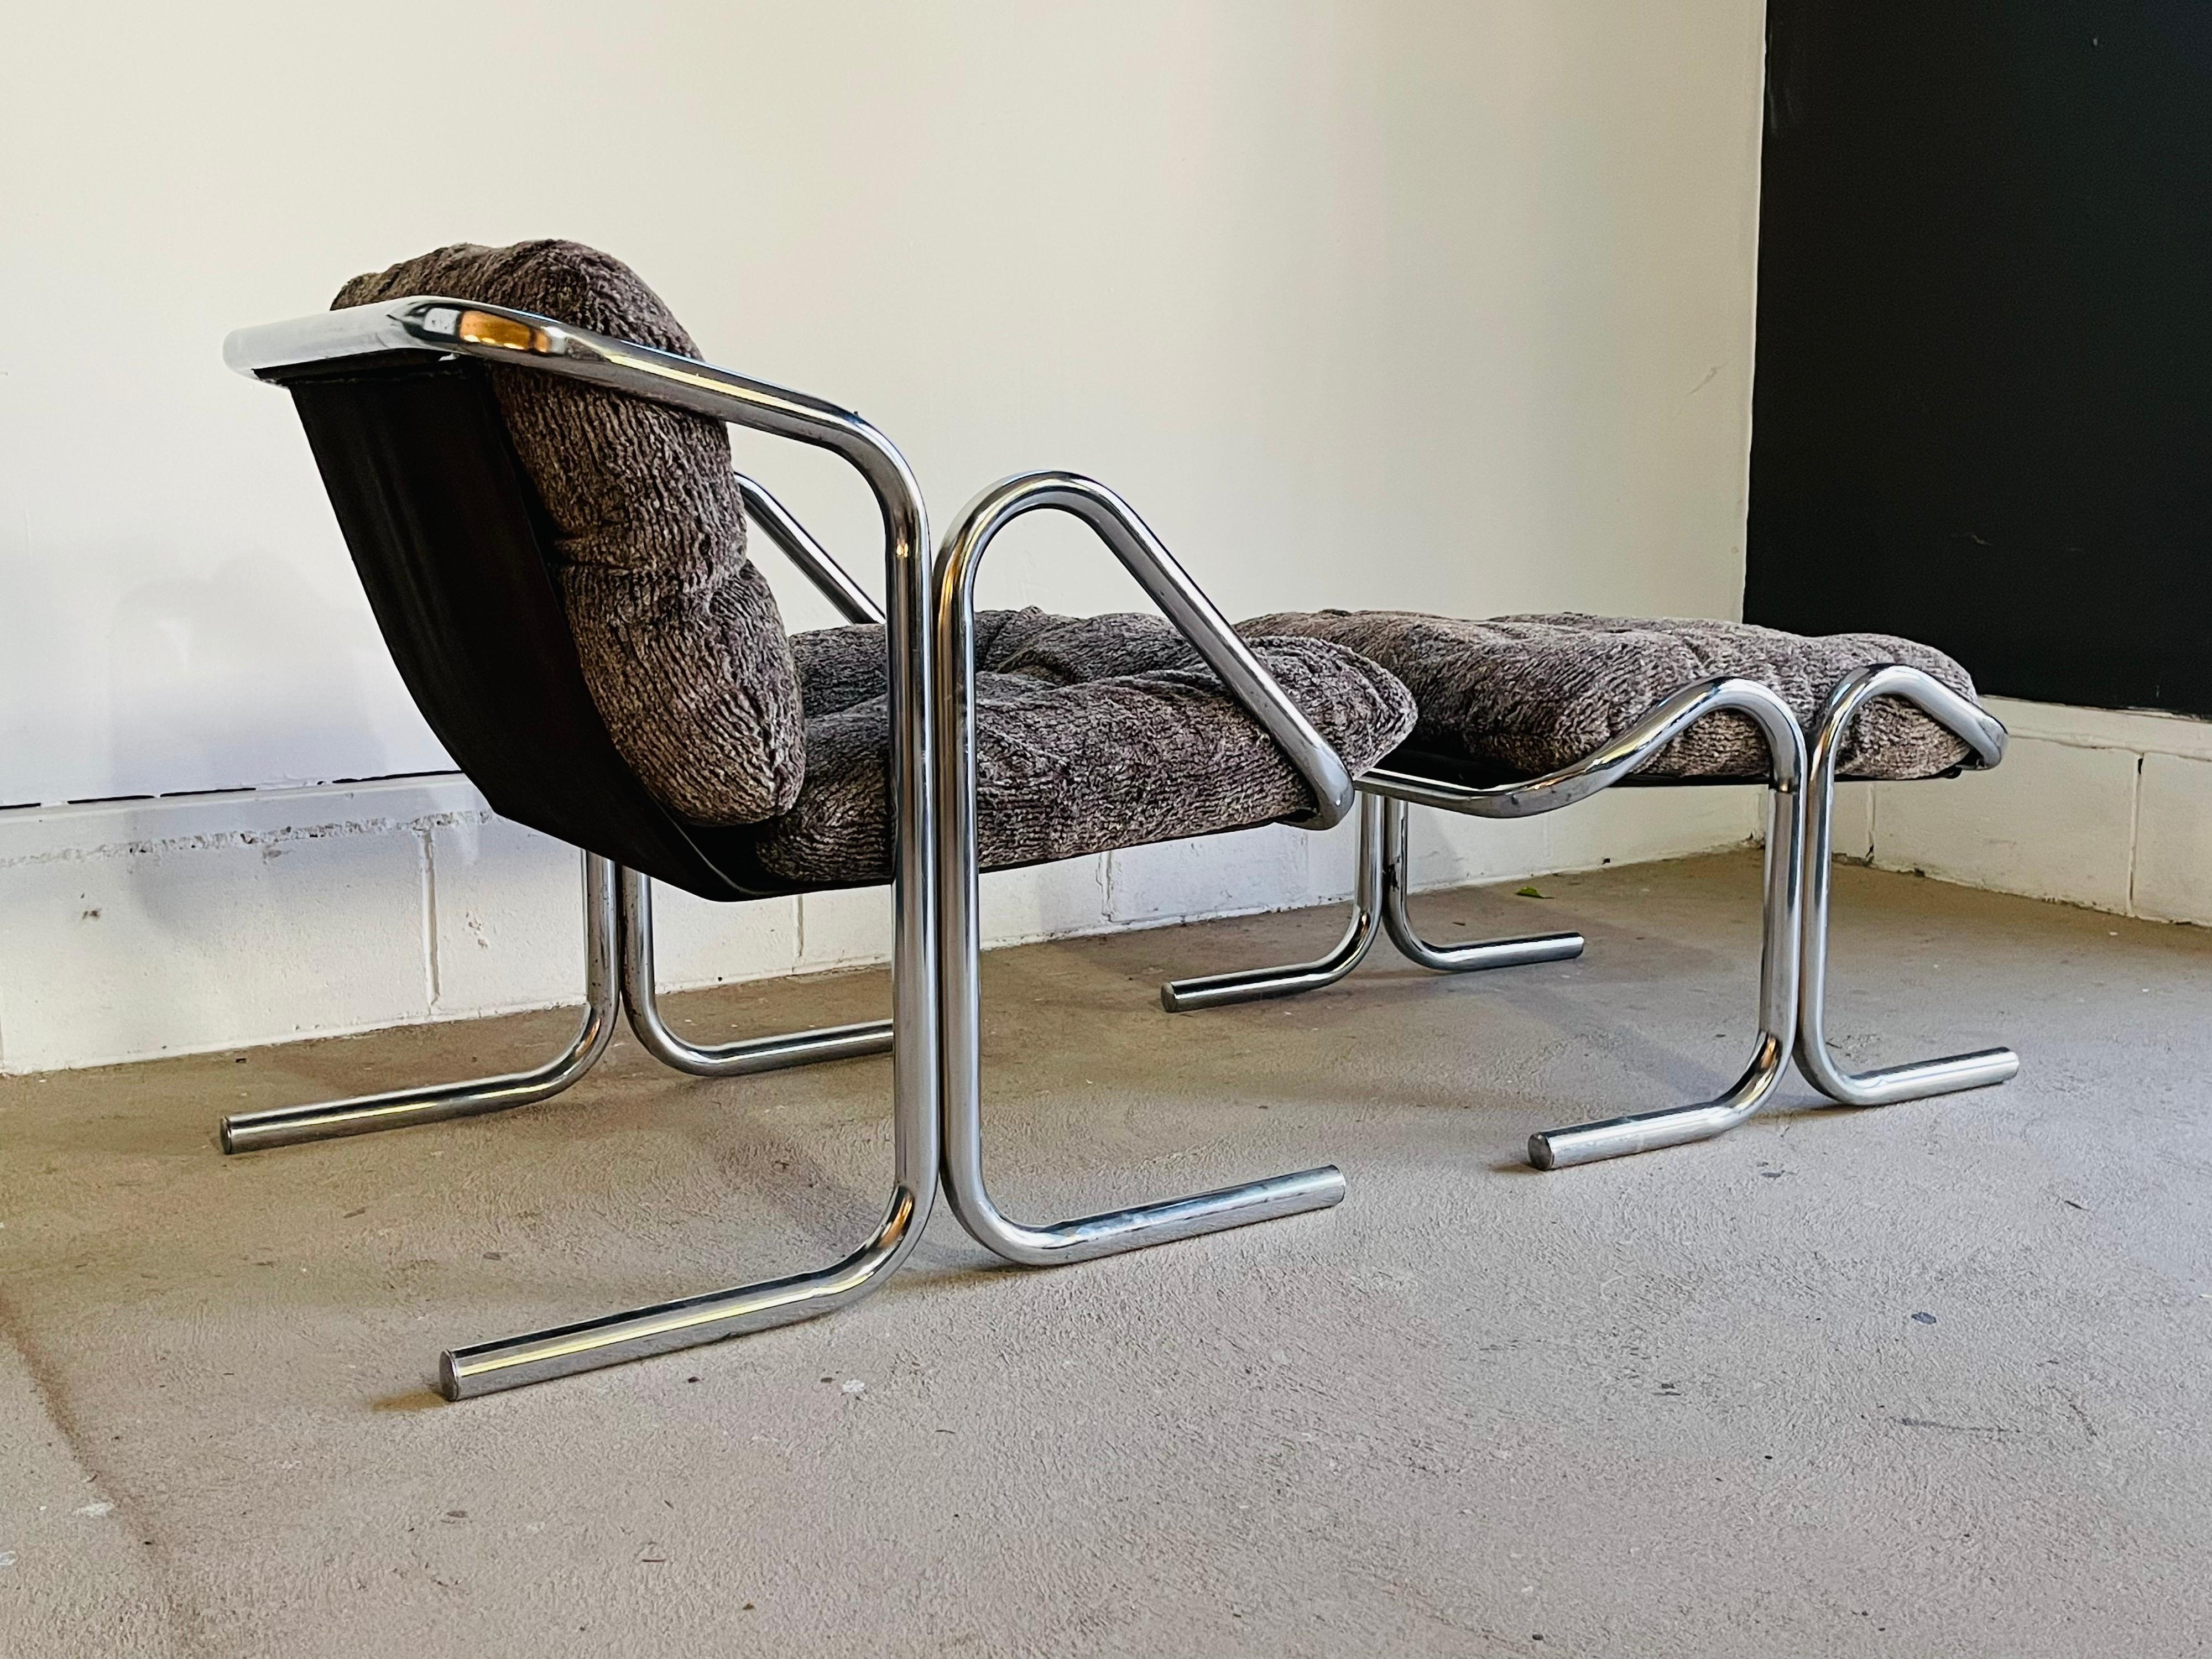 20th Century Mid-Century Modern Chrome Lounge Chair & Ottoman by Jerry Johnson for Landes